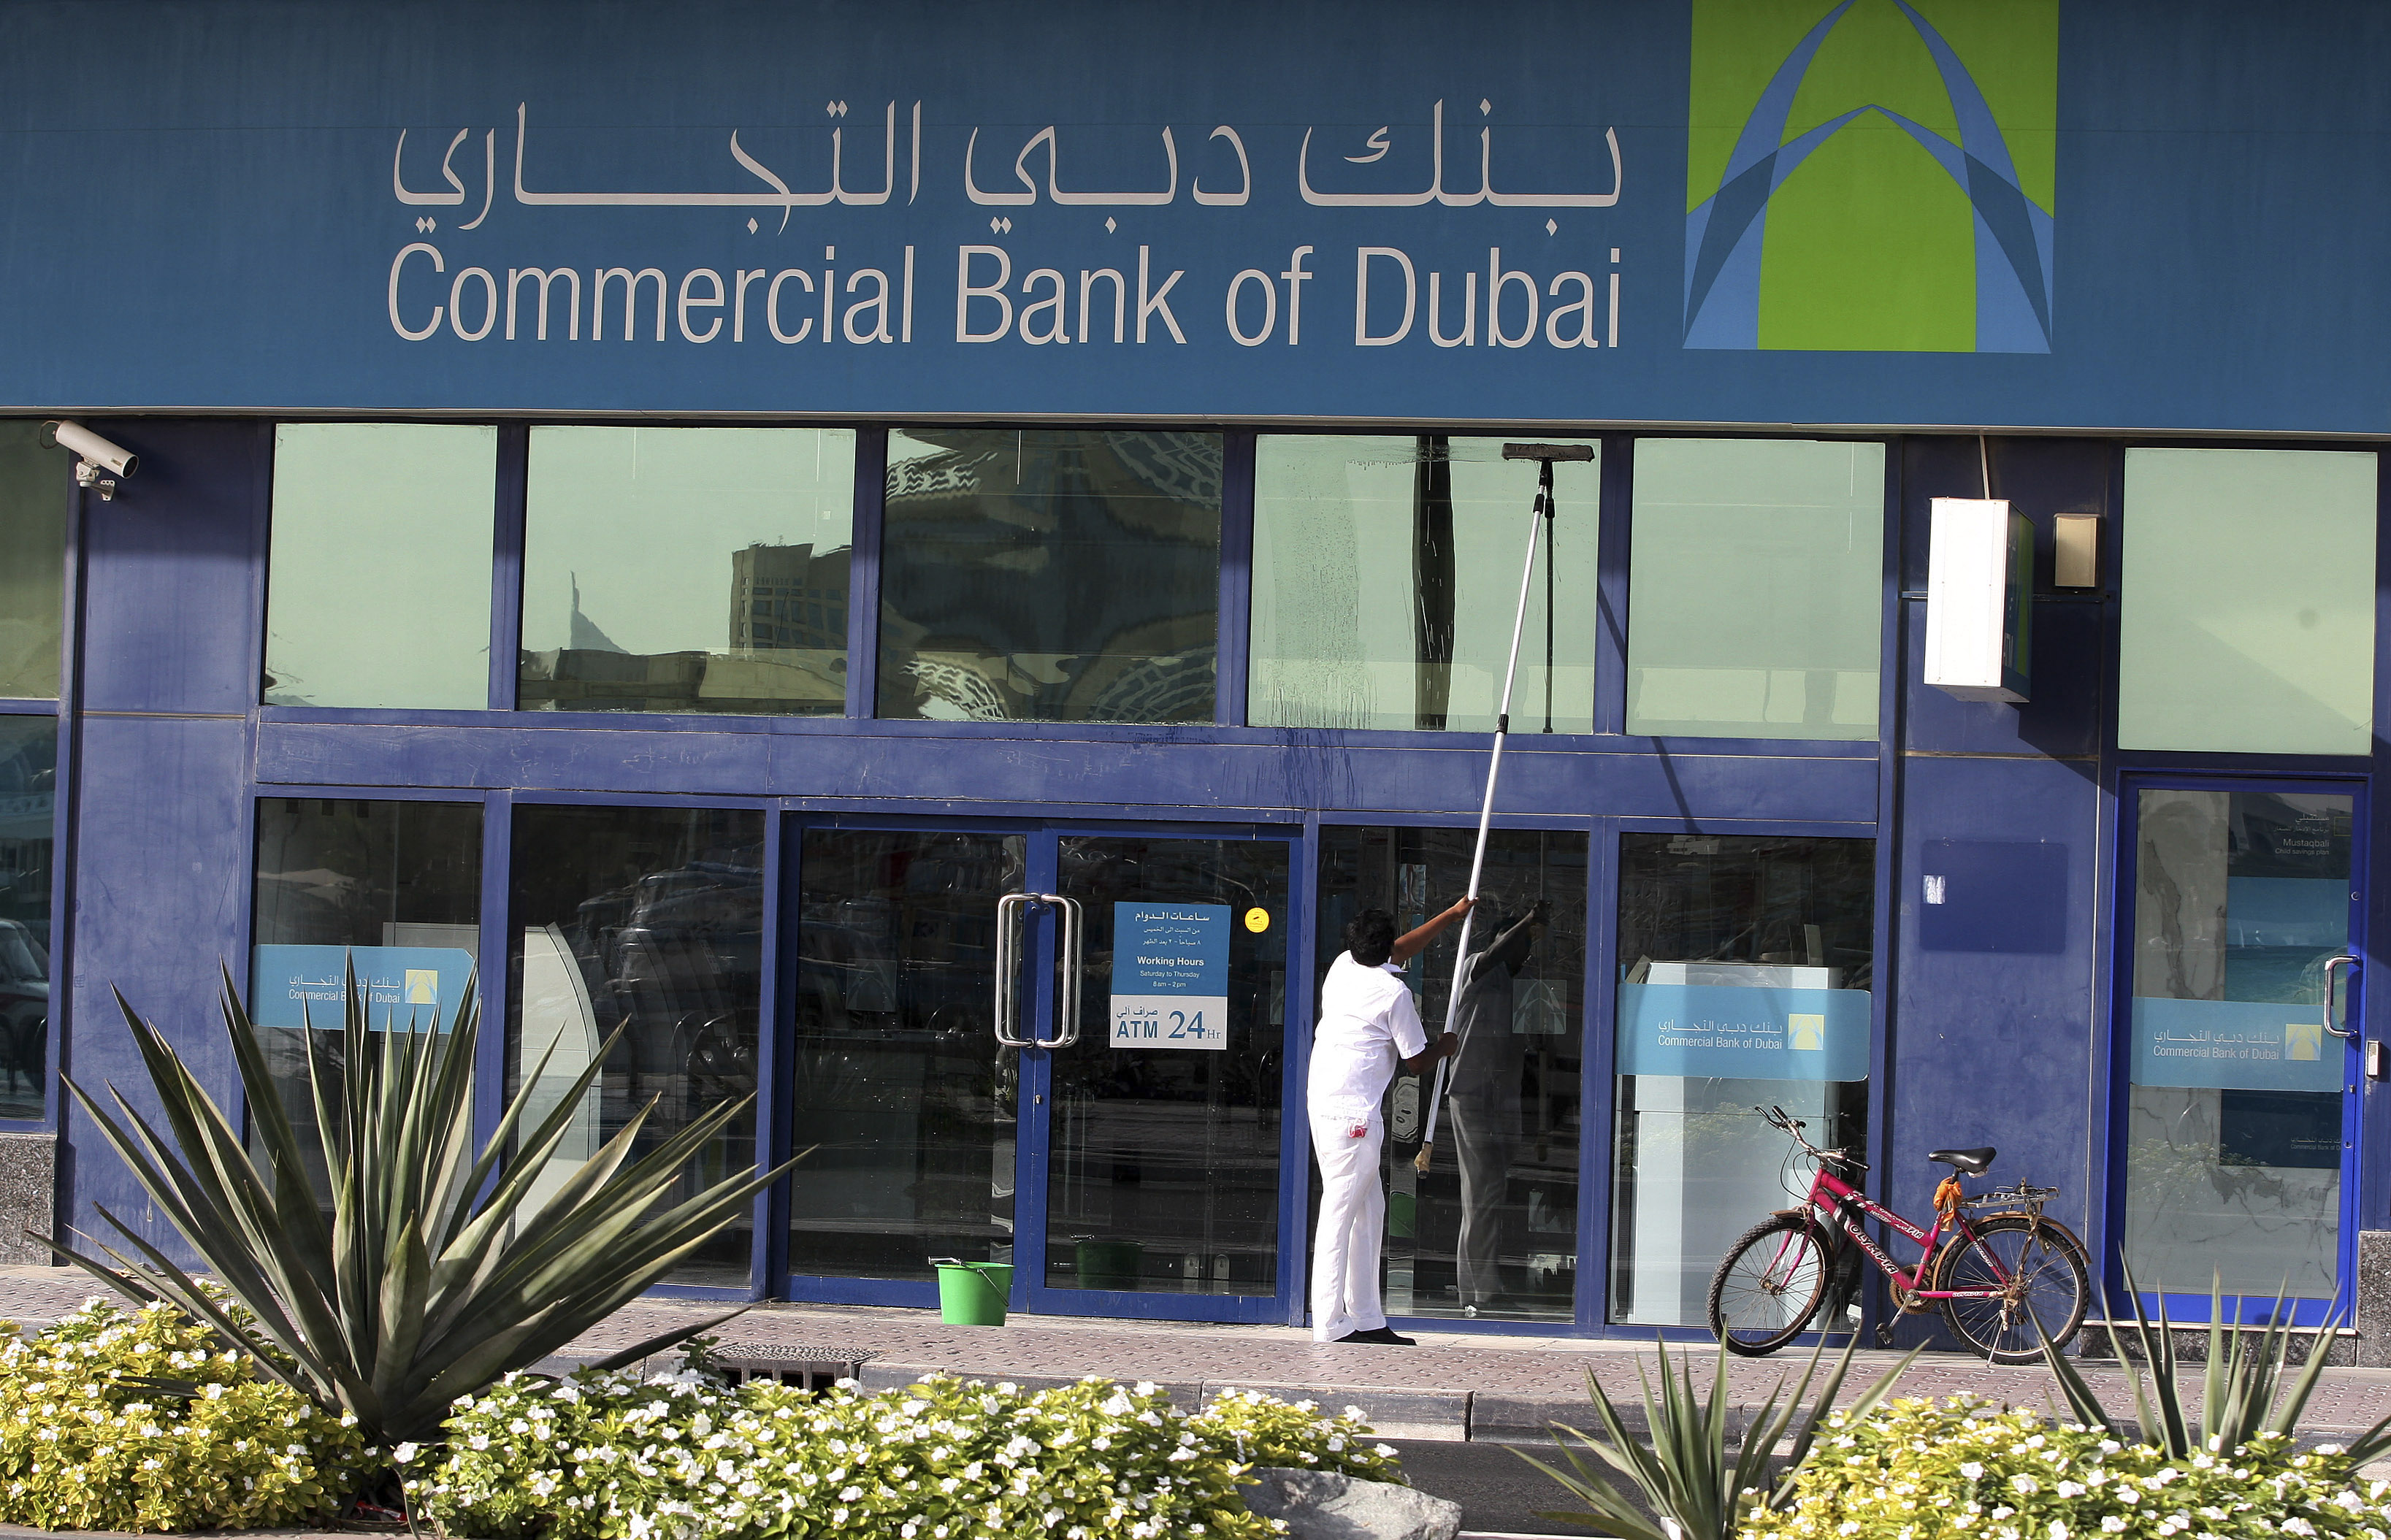 A man cleans the windows of a branch of Commercial Bank of Dubai on Baniyas Road in Dubai